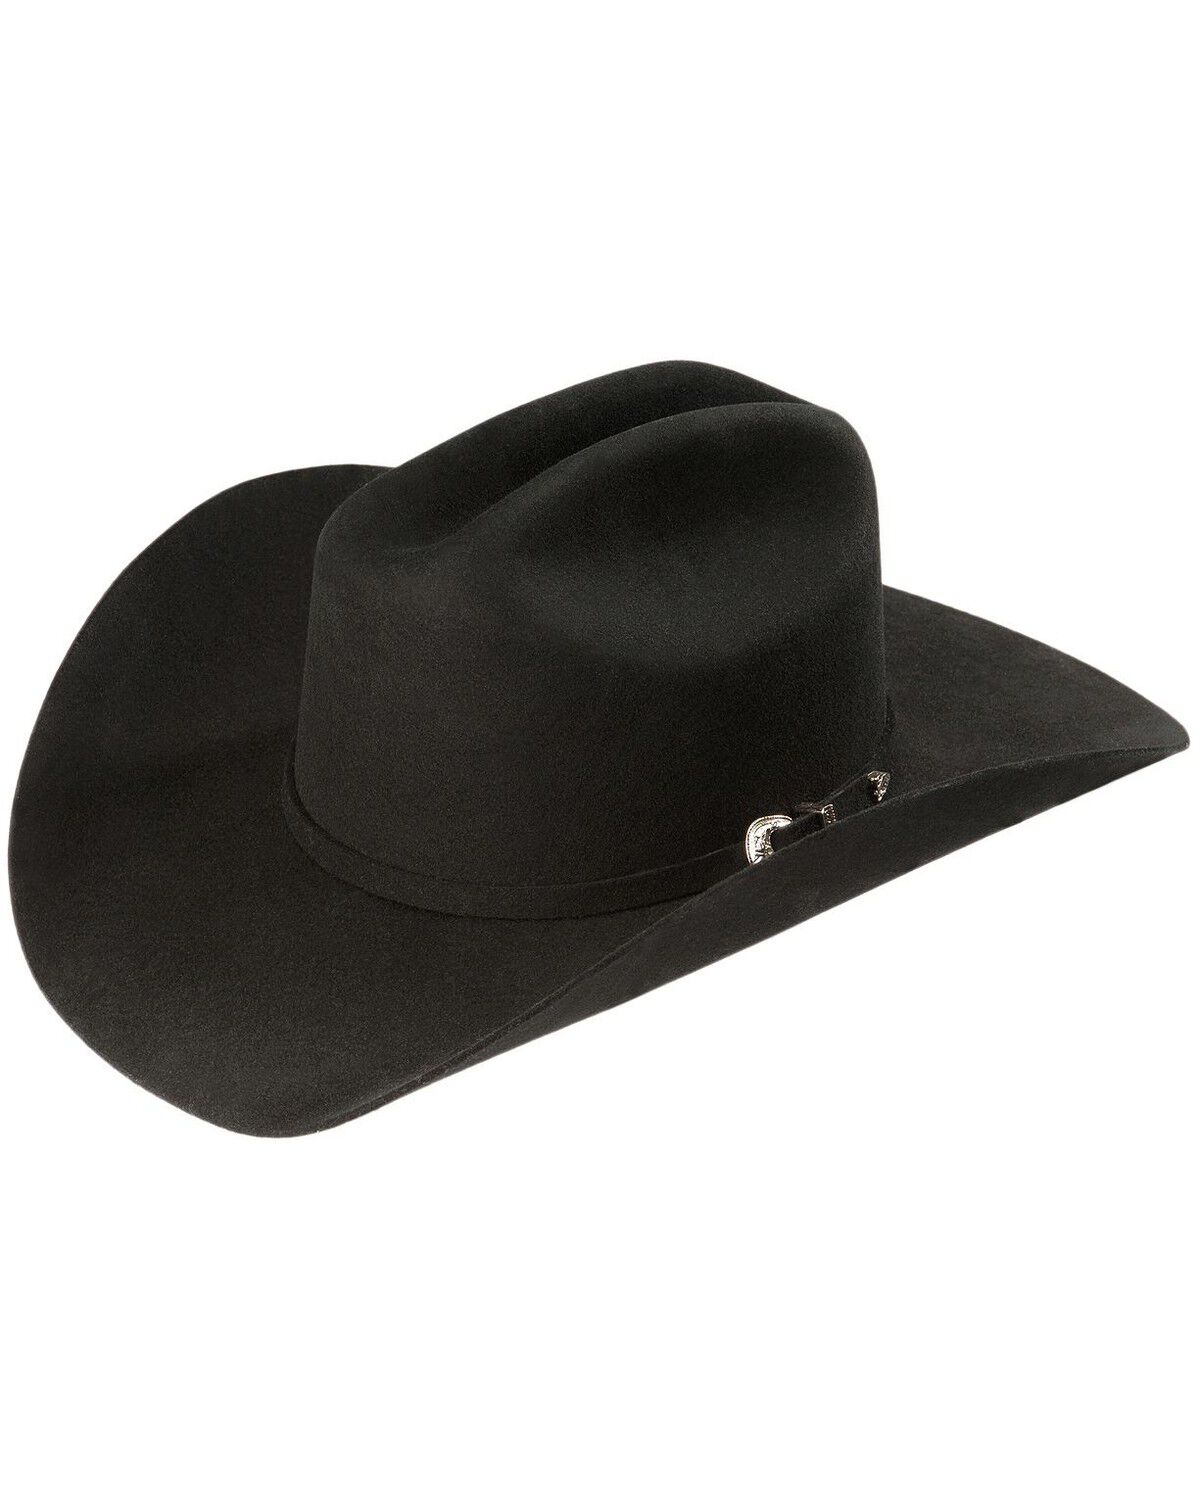 JF0330-BY Justin Men's Silver Belly 3X Dixon Cowboy Hat 